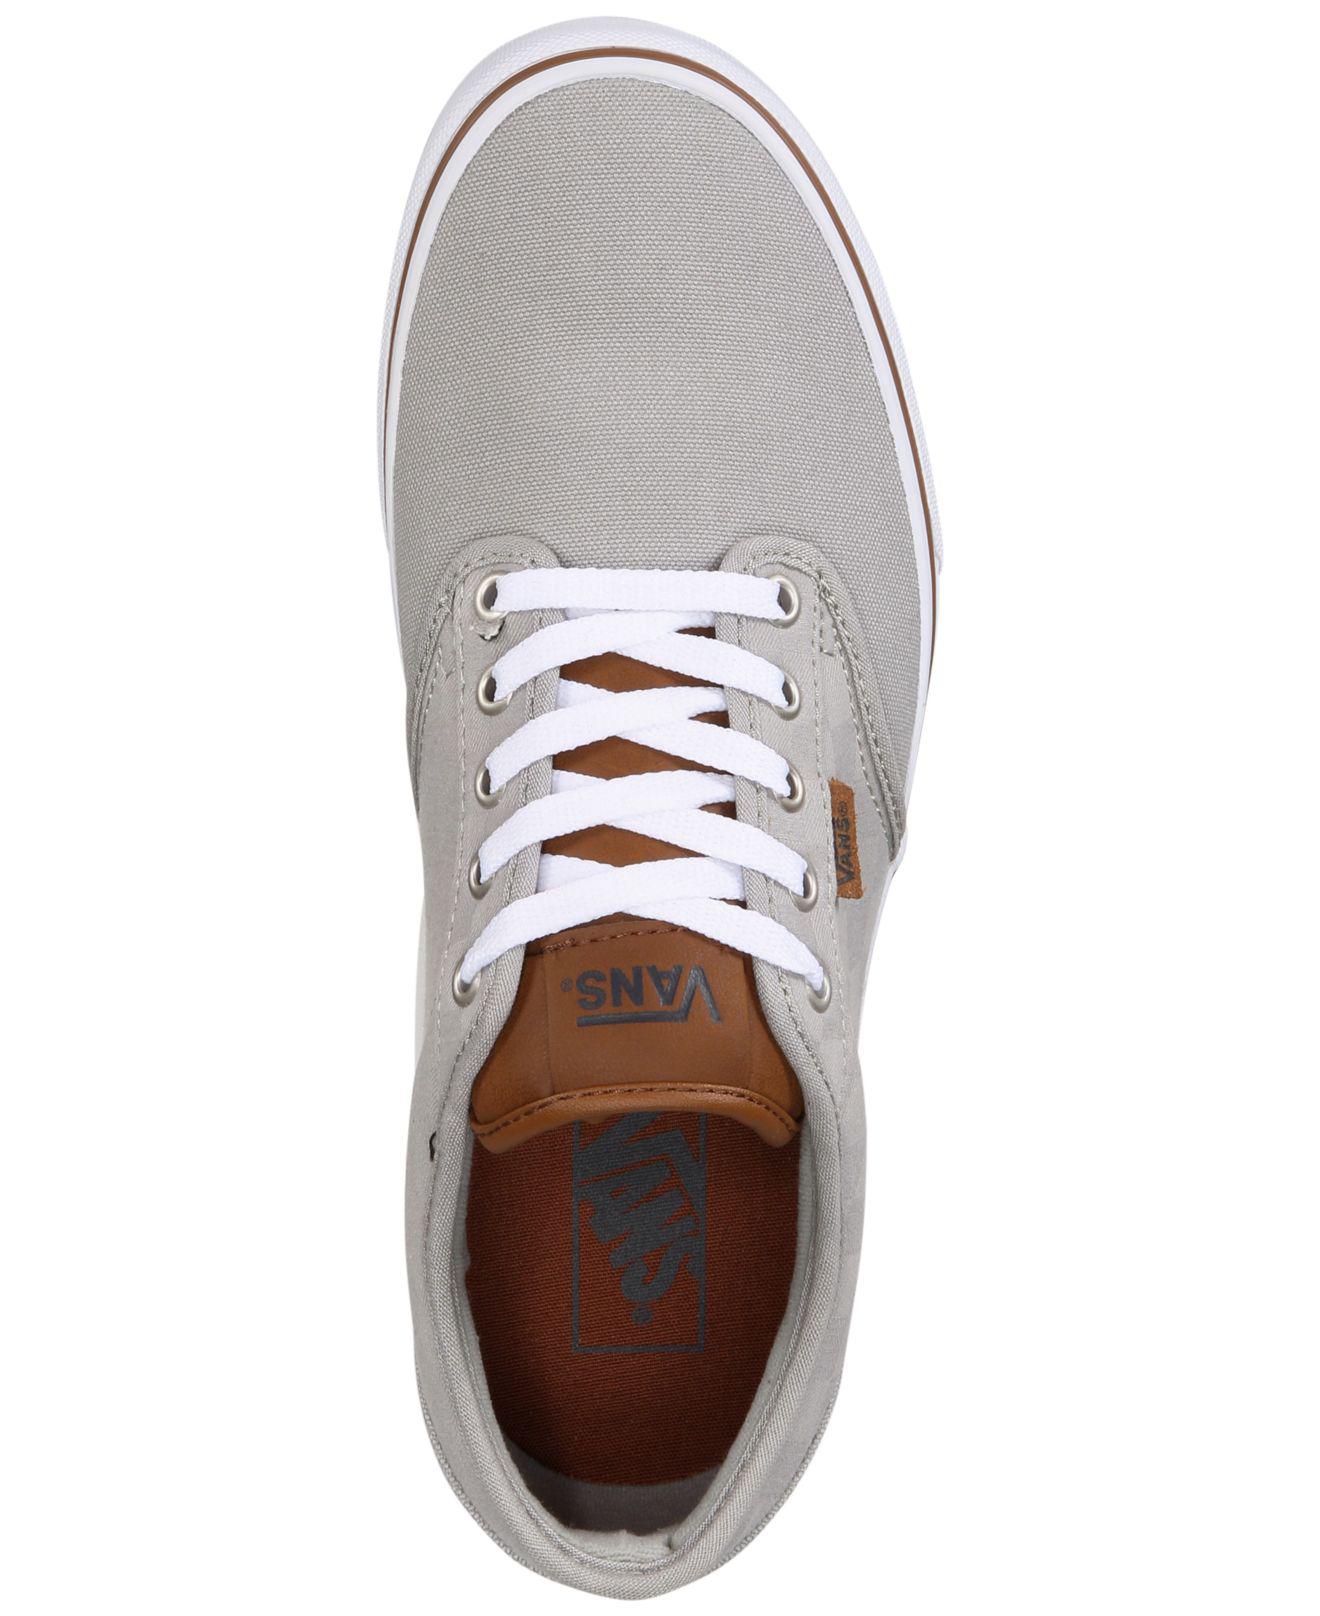 vans mens shoes atwood gray canvas